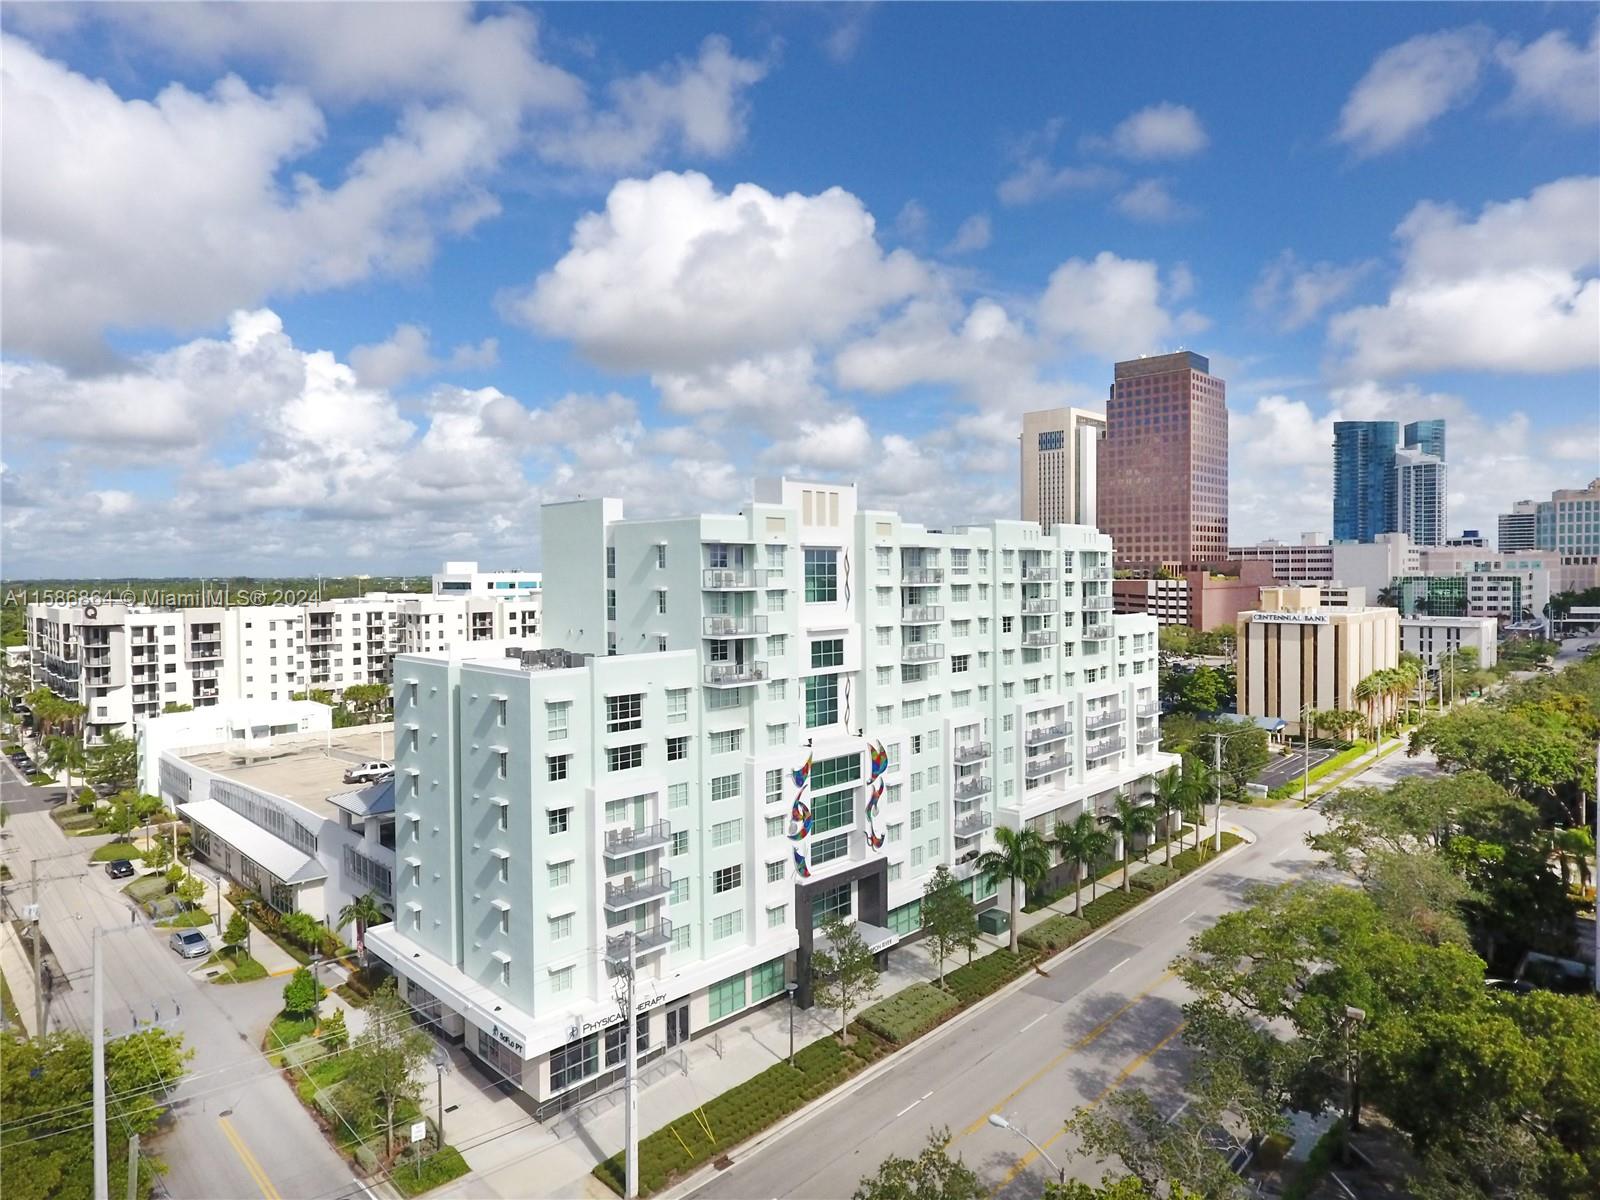 View Fort Lauderdale, FL 33316 multi-family property